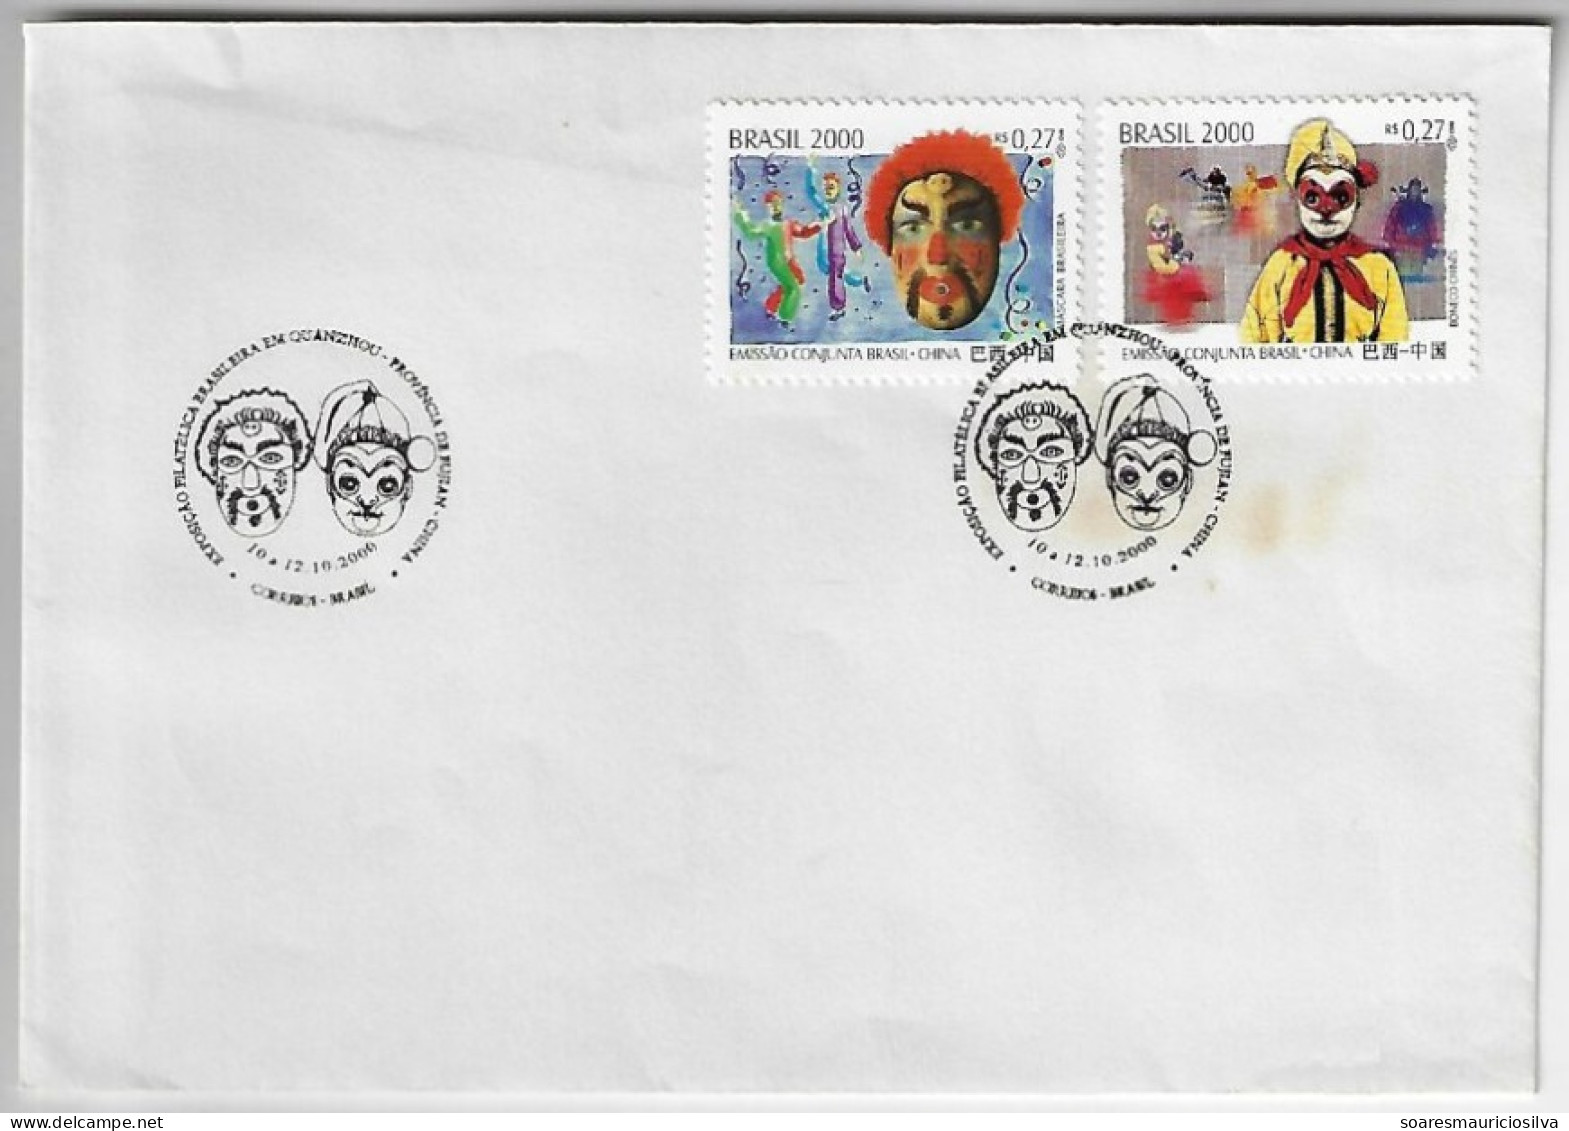 2000 2 Cover Stamp Joint Issue Brazil China 25 Years Diplomatic Relations Between Countries Brazilian Mask Chinese Doll - Covers & Documents